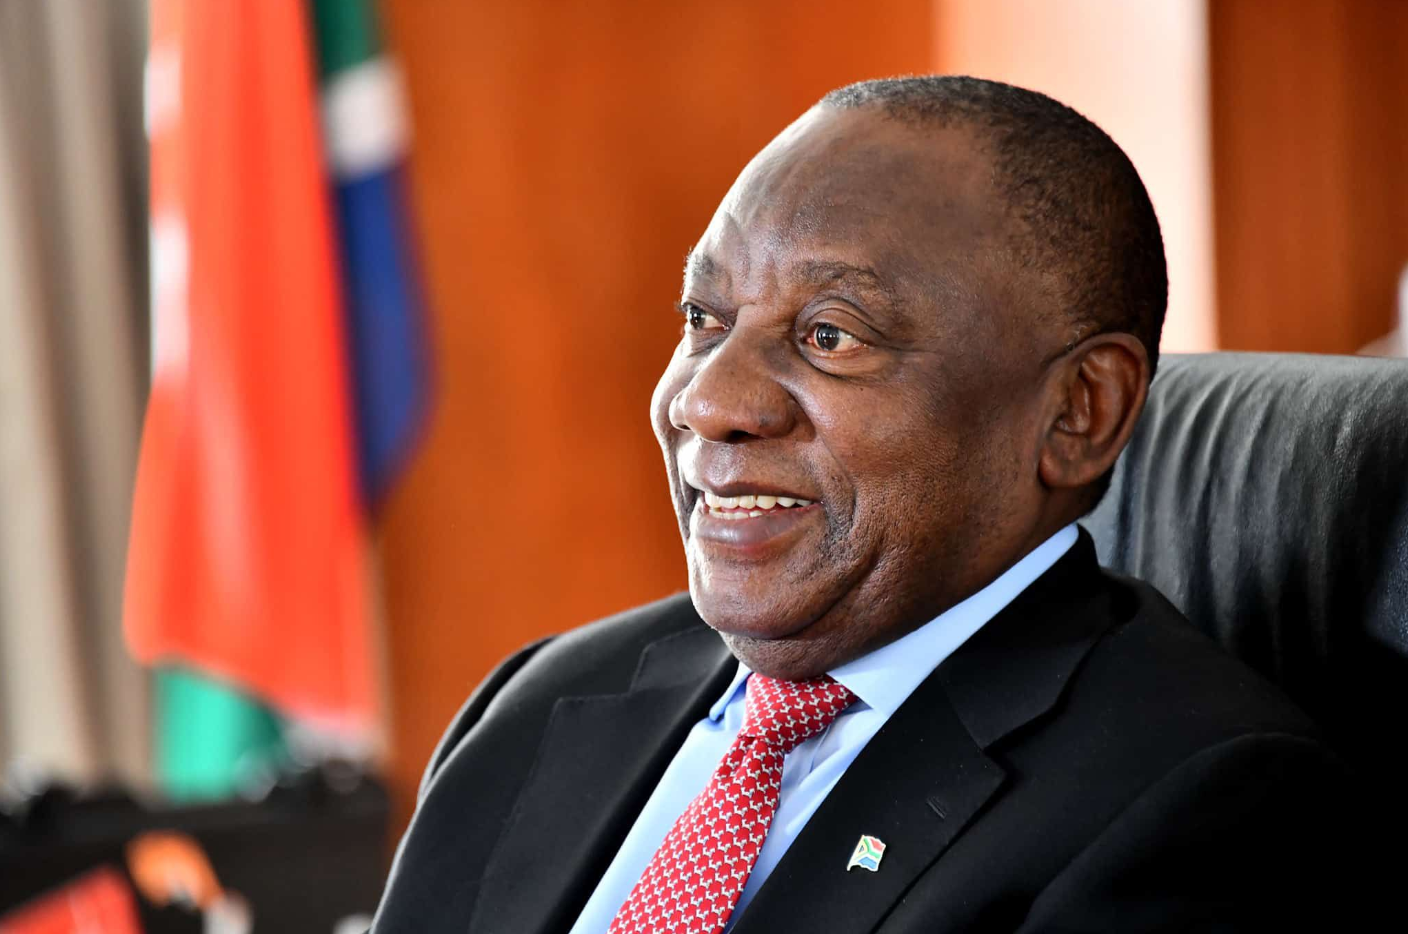 South Africa’s Ramaphosa should have acted against graft under Zuma: report